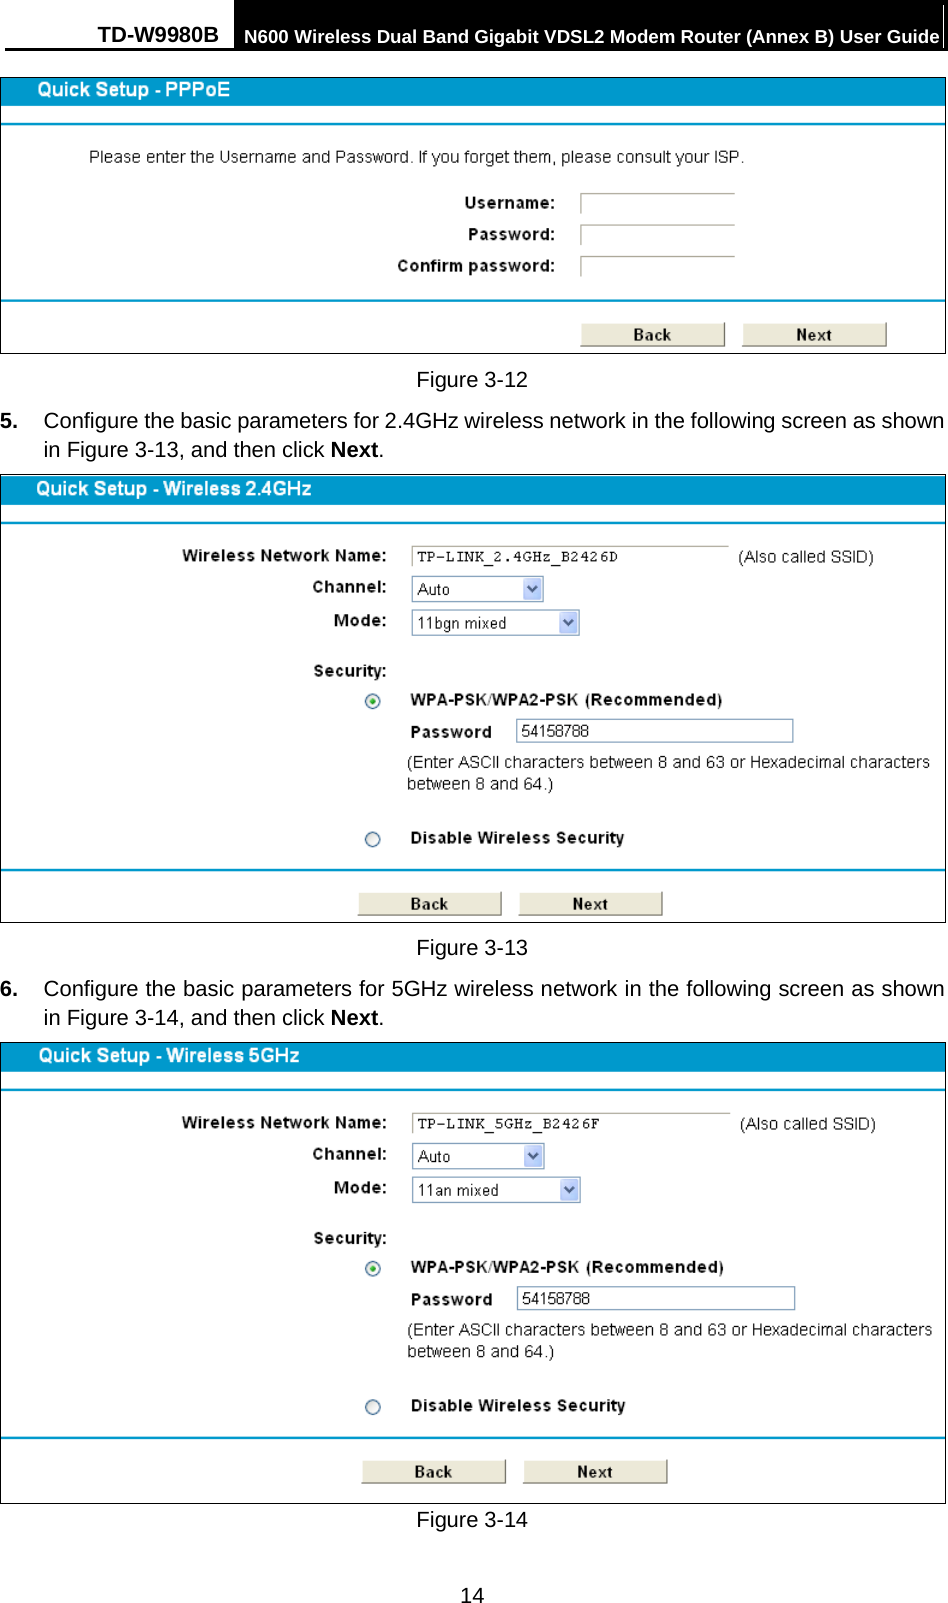 TD-W9980B N600 Wireless Dual Band Gigabit VDSL2 Modem Router (Annex B) User Guide   Figure 3-12 5. Configure the basic parameters for 2.4GHz wireless network in the following screen as shown in Figure 3-13, and then click Next.  Figure 3-13 6. Configure the basic parameters for 5GHz wireless network in the following screen as shown in Figure 3-14, and then click Next.  Figure 3-14 14 